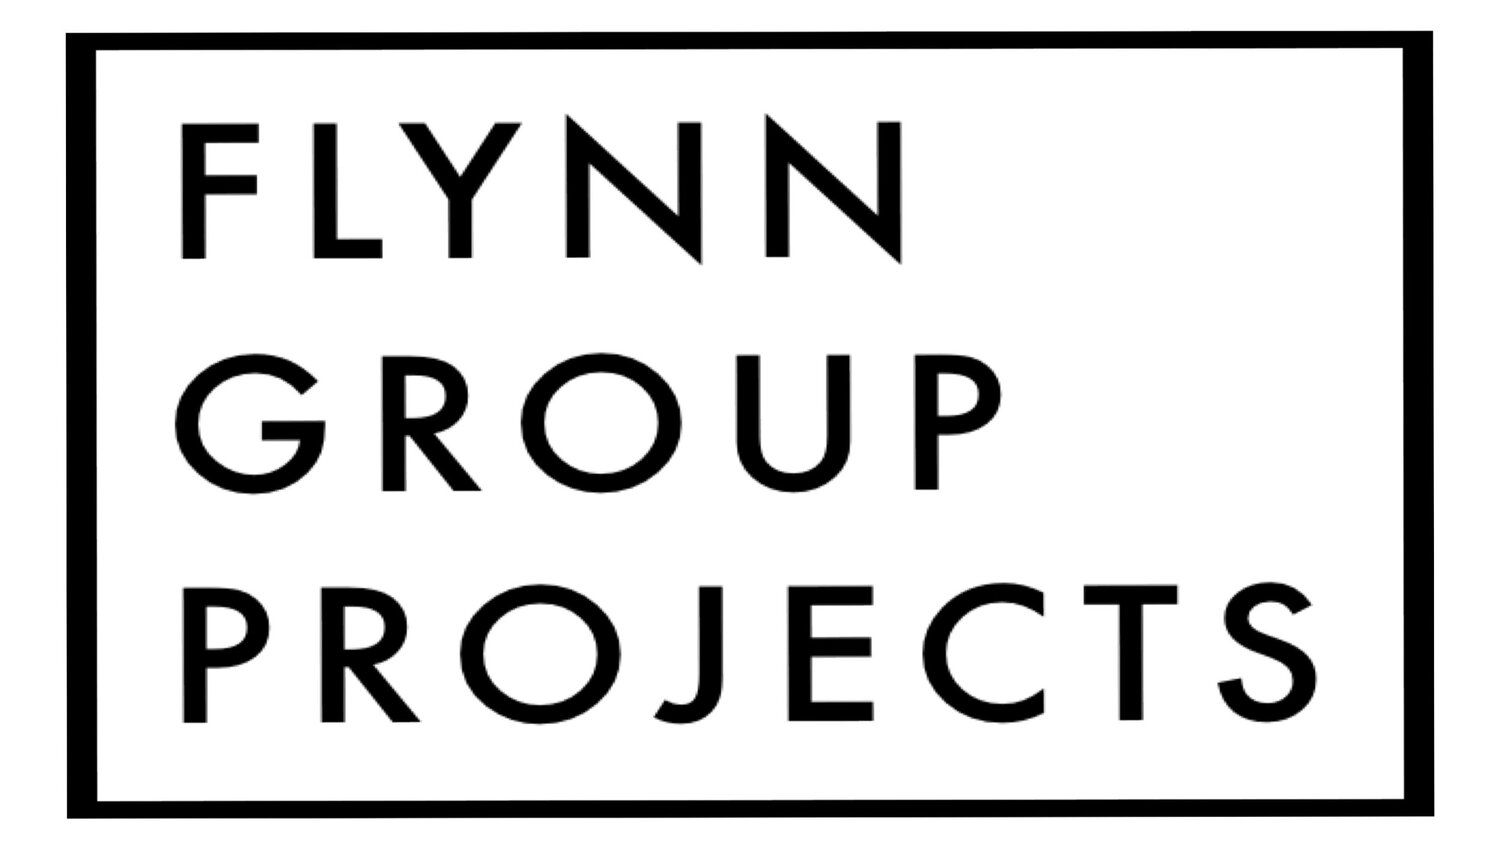 Flynn Group Projects